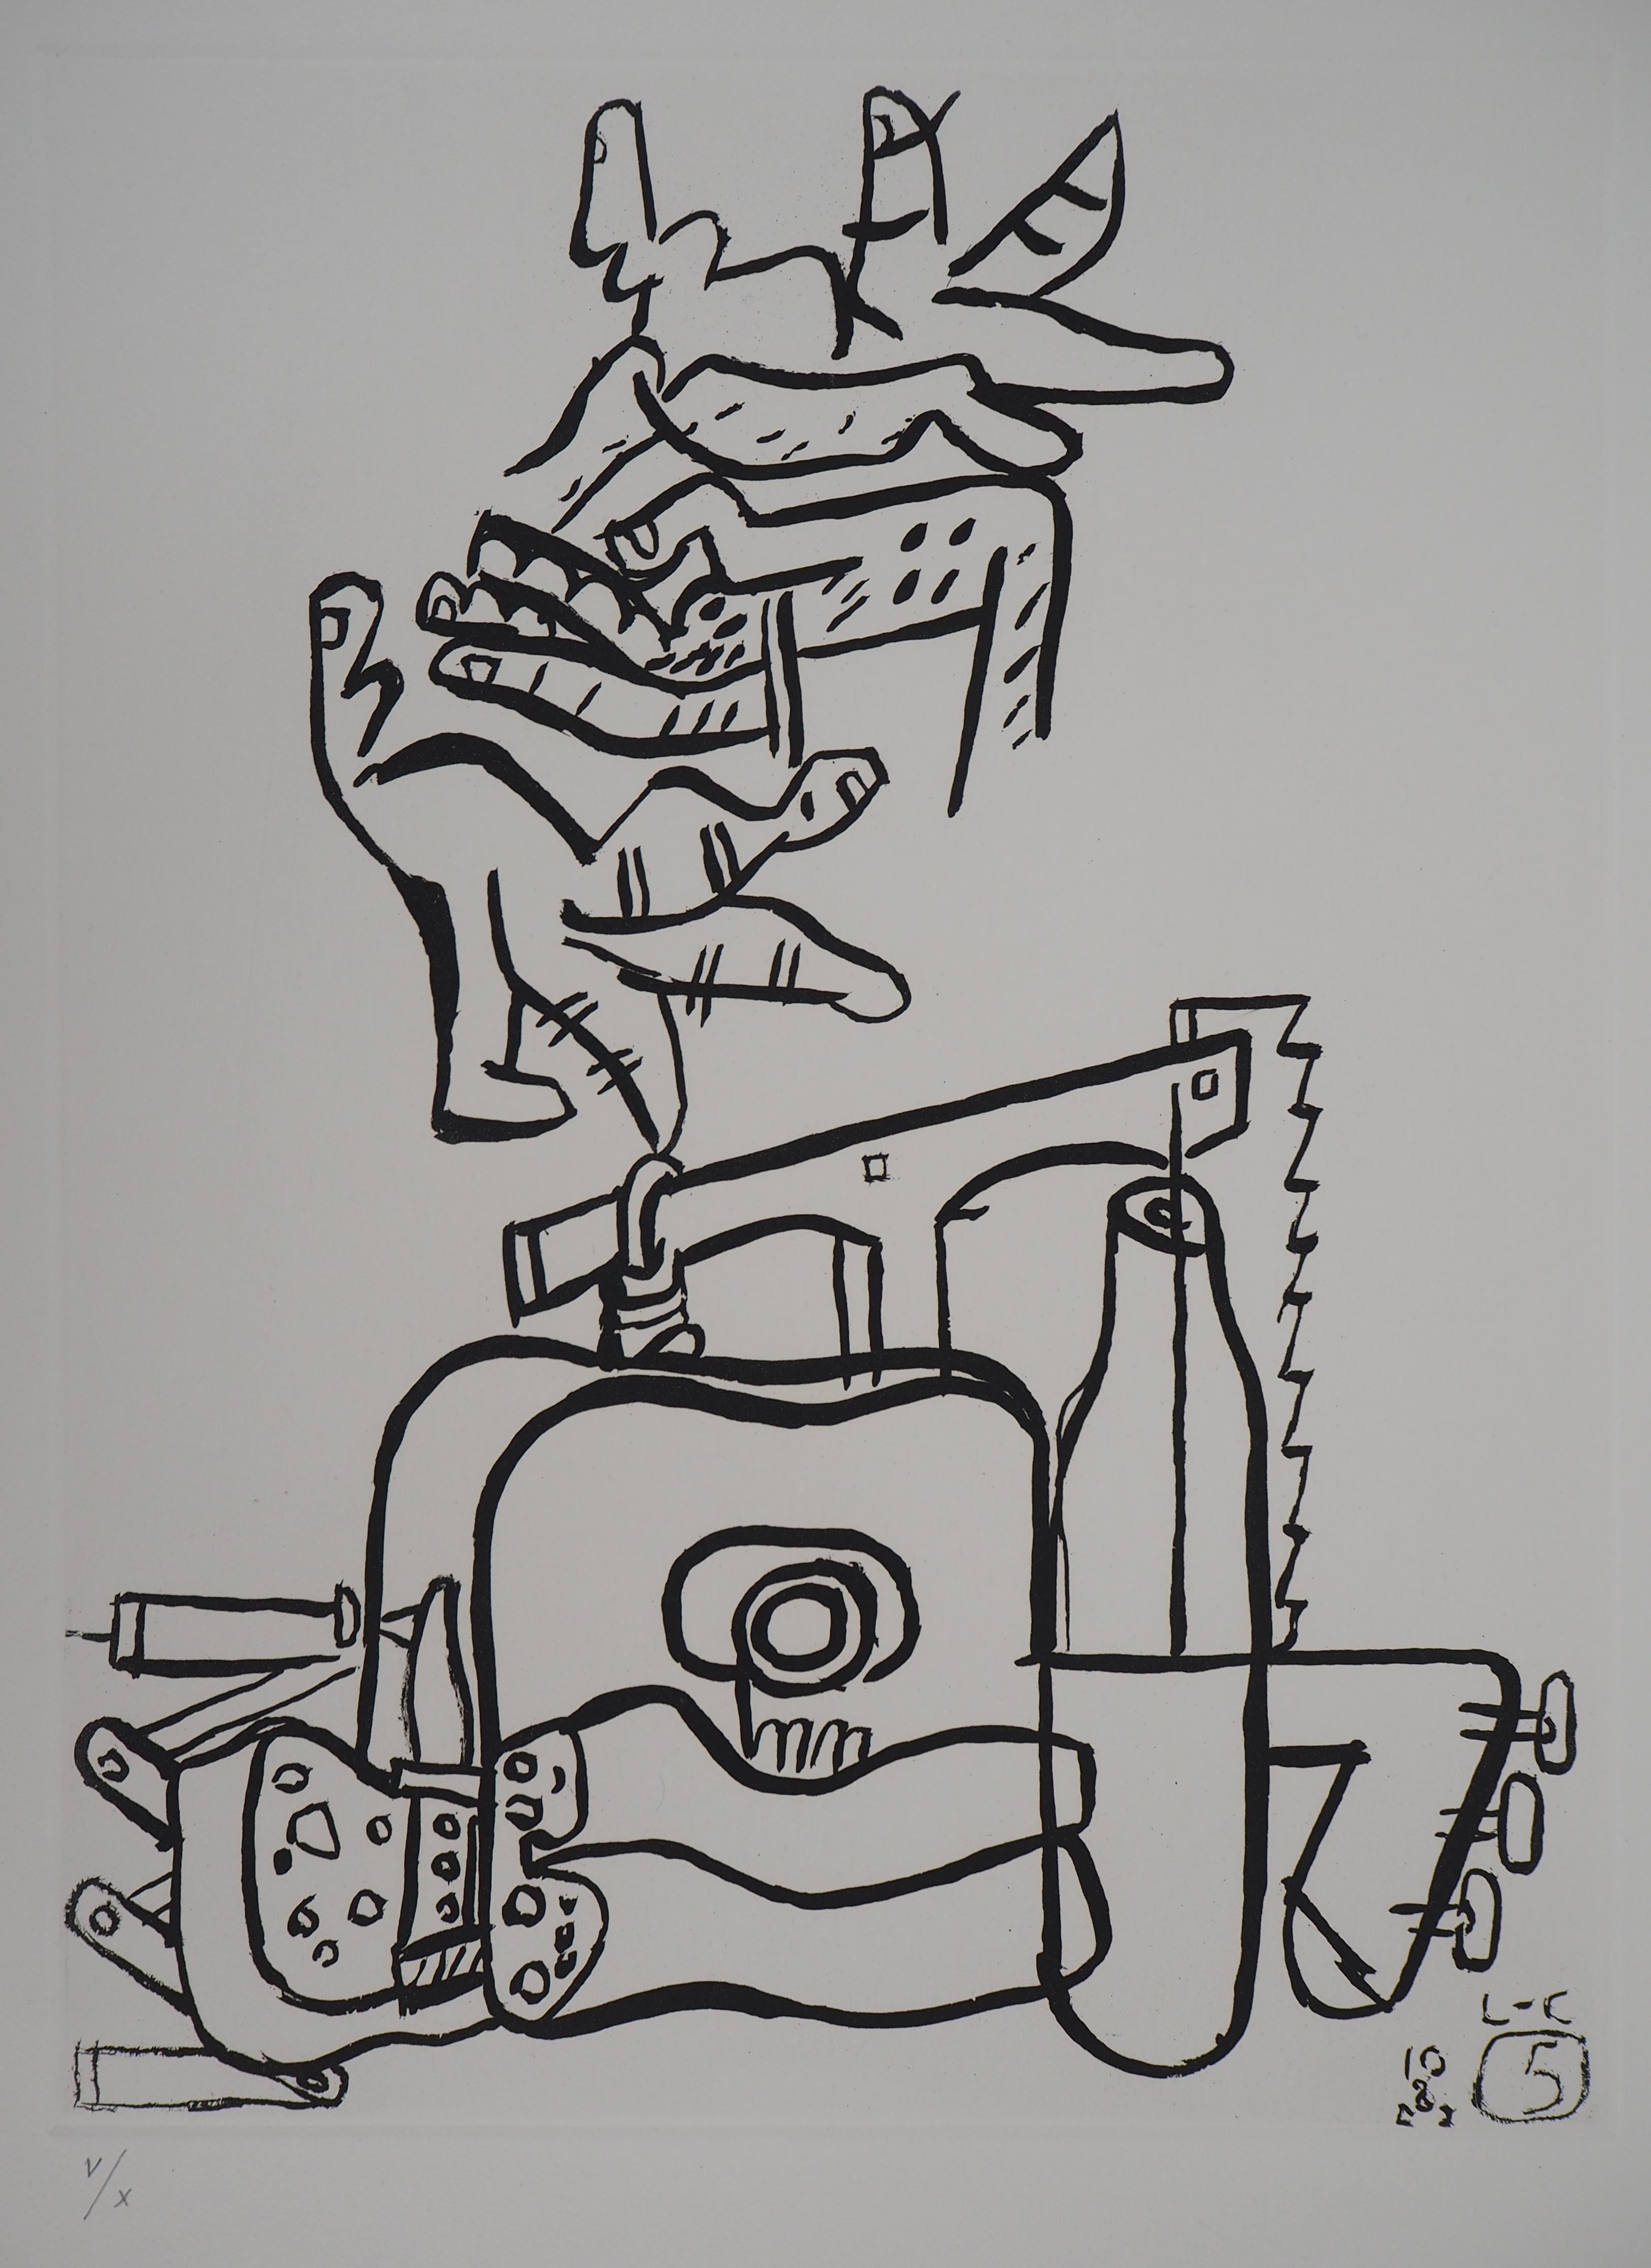 Le Corbusier Figurative Print - Unite : Architect Tools and Hands - Original etching - Numbered / 10